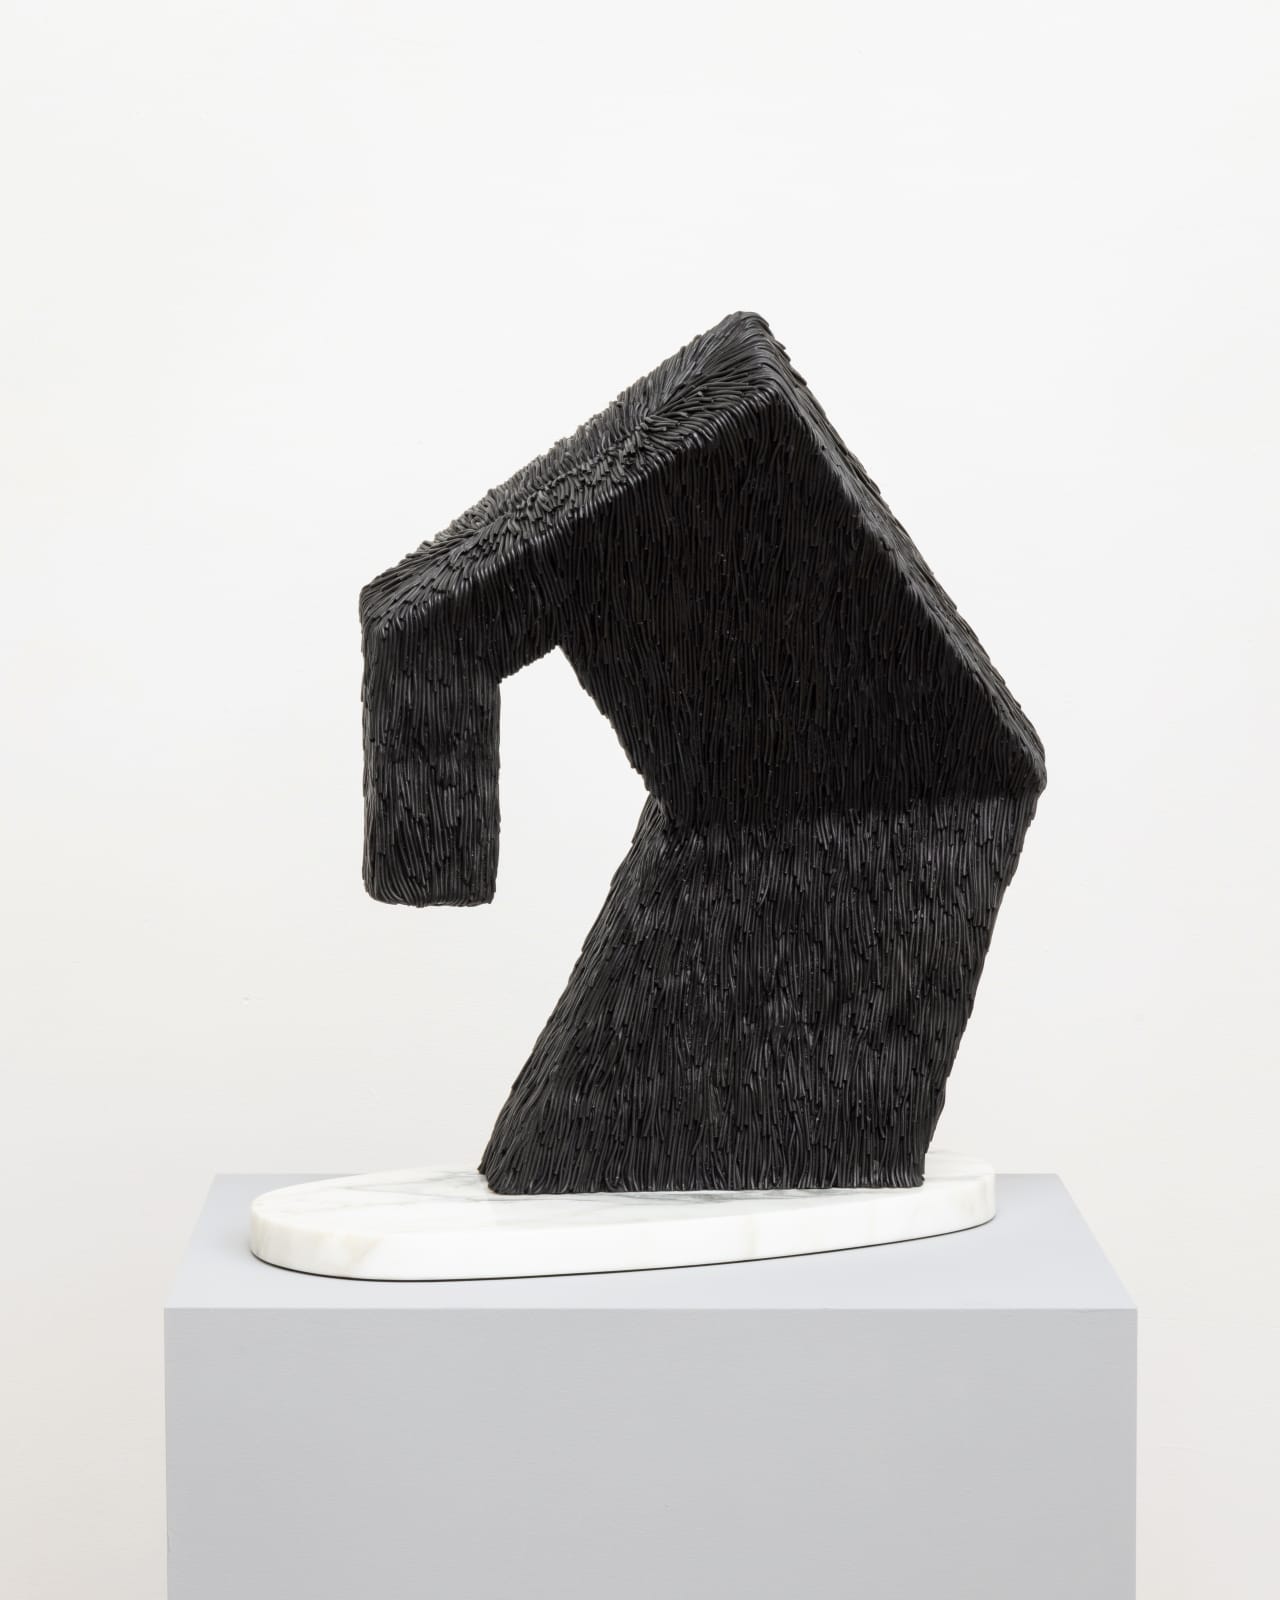 Free-standing bronze sculpture of a tall angular shape that is bending over and perched on a rounded marble base. The sculpture is cast with a surface texture resembling shaggy hair and treated with a black patina. 